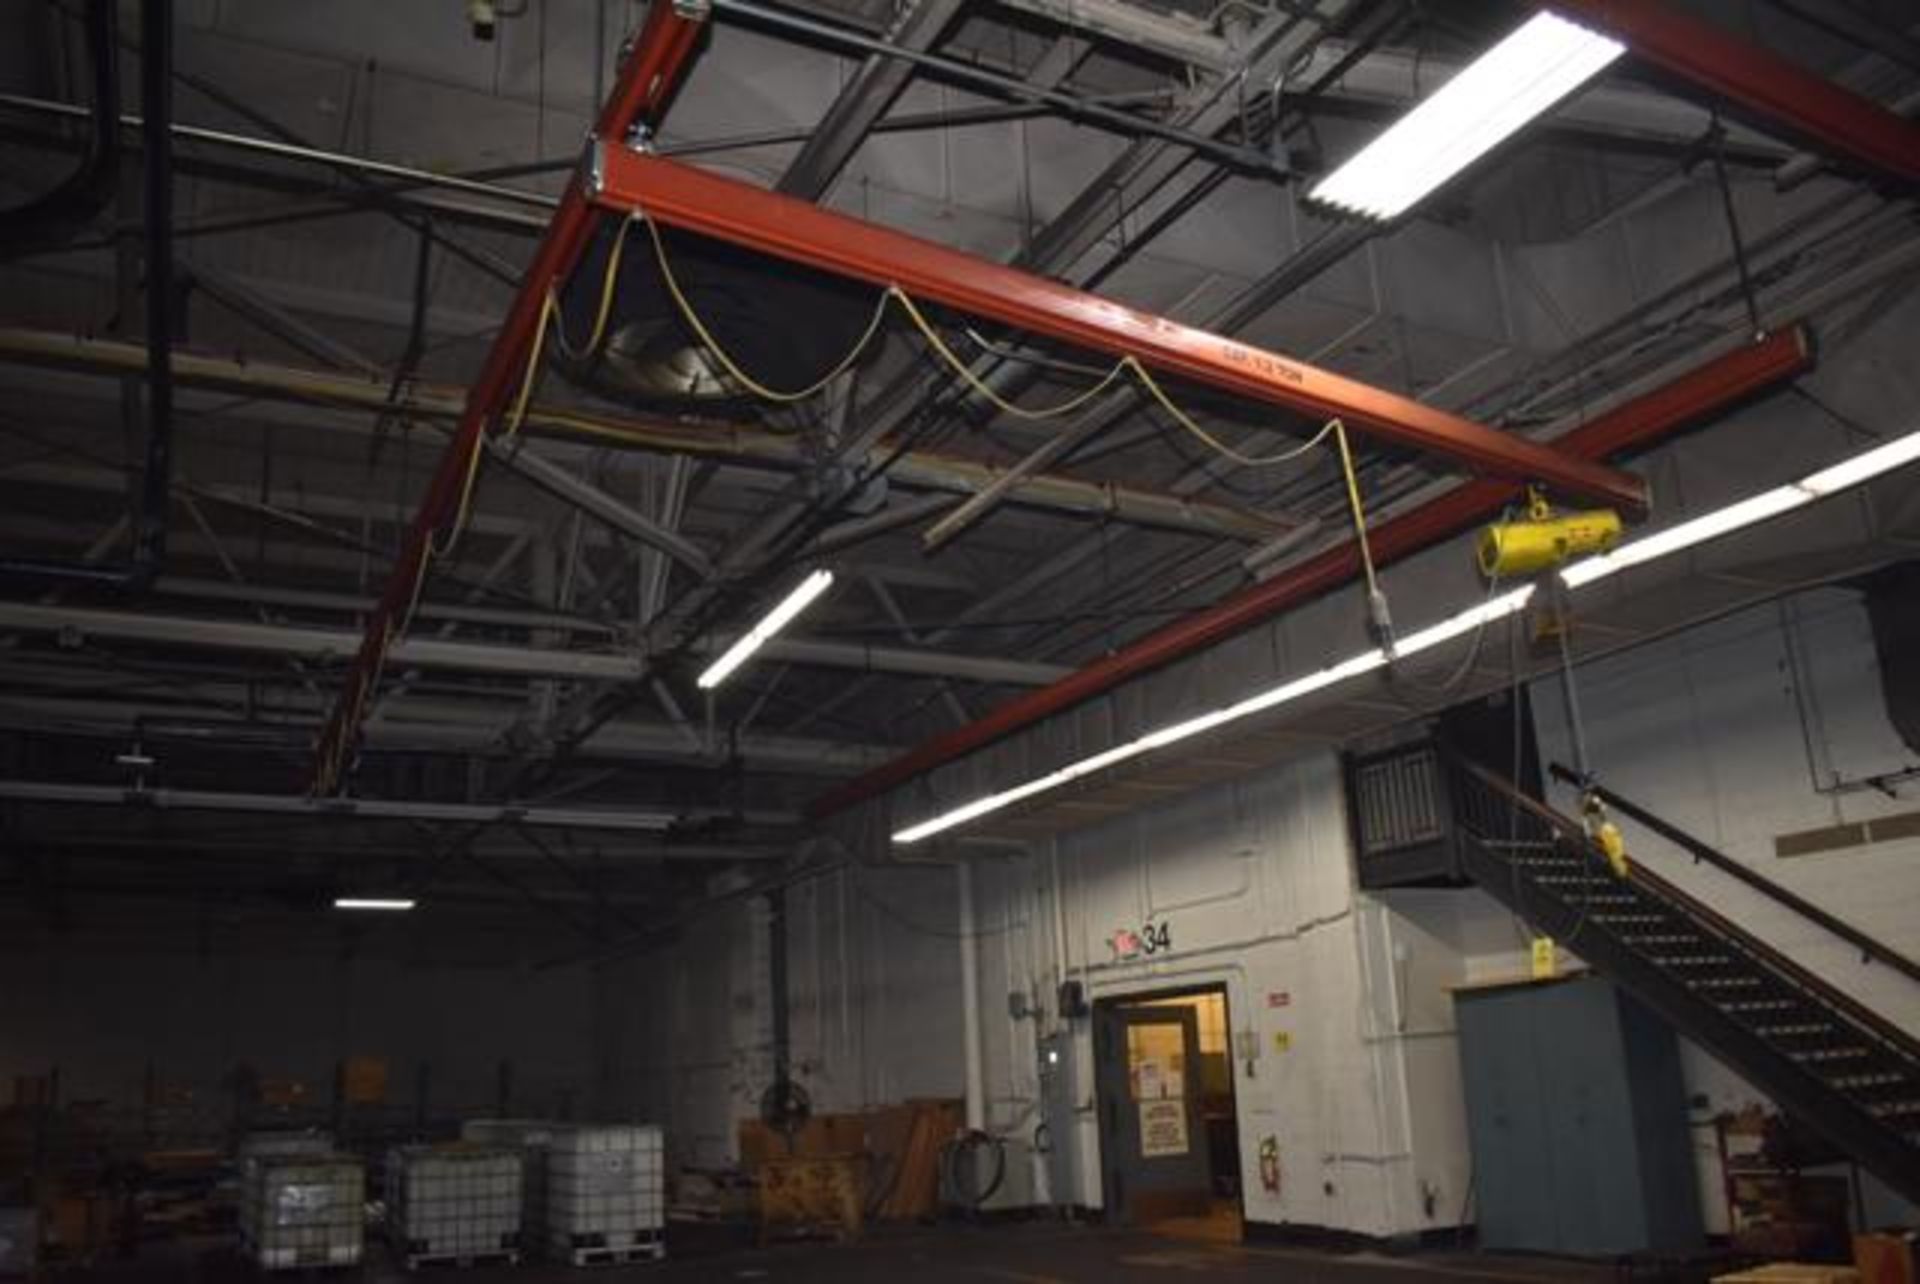 Demag Overhead Crane System Suspended from Ceiling, Approx. 20' Span x 30' Floor Space, Single